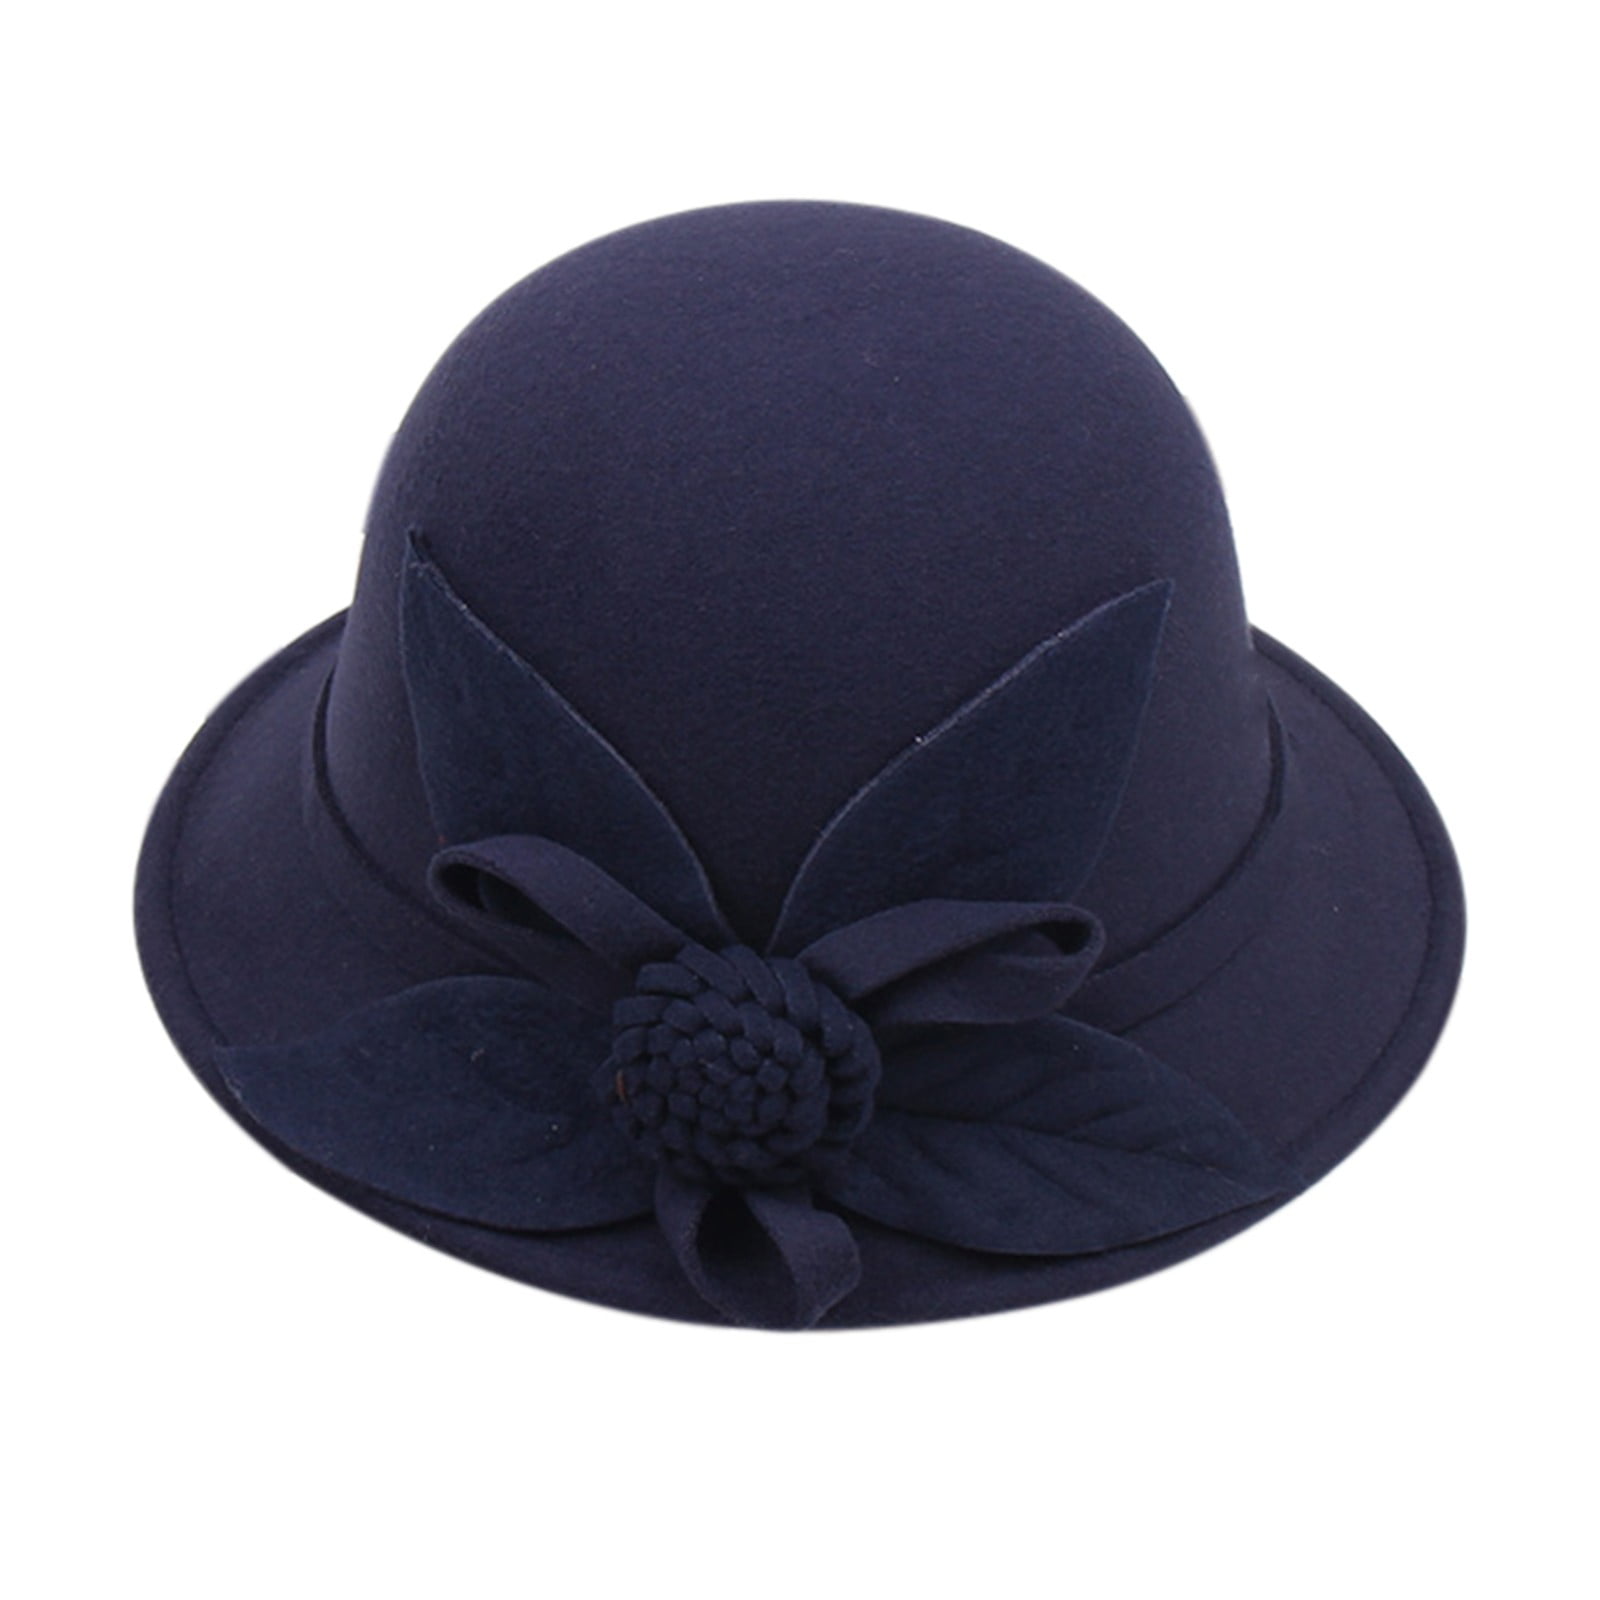 LBECLEY Rain Hat Women's Autumn and Winter Flowers Round Top Casual  Fisherman's Basin Cap Small Bowler Hat Canvas Hats for Men Women Black M